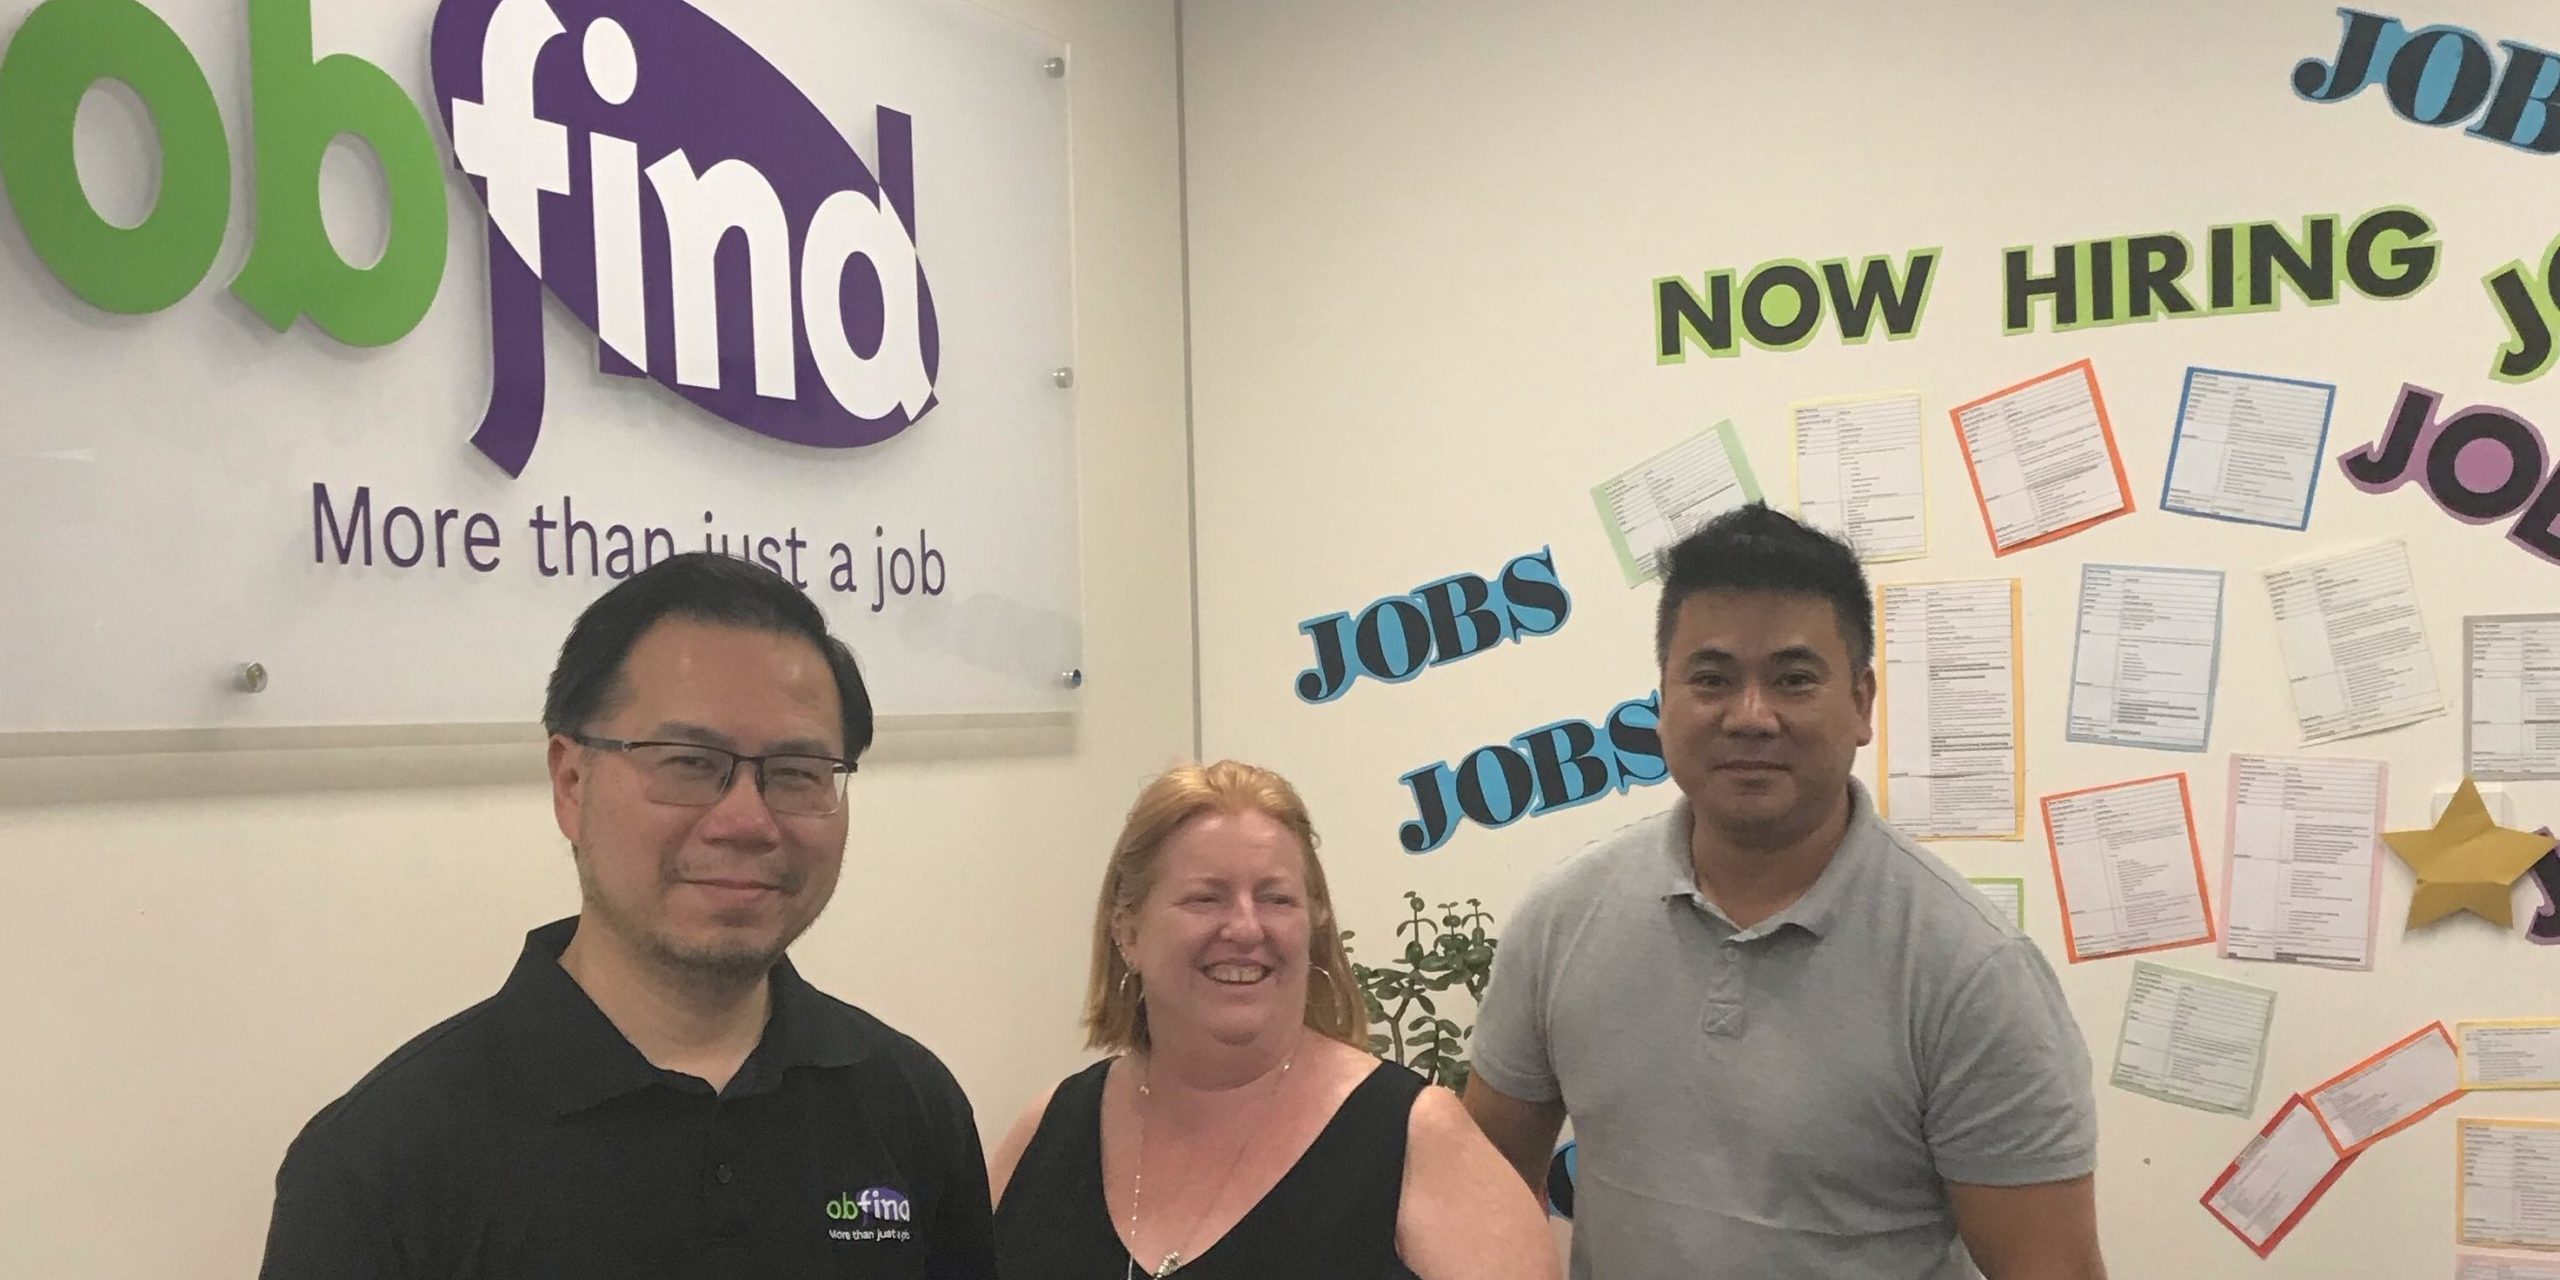 Springvale Jobactive - image of three team members standing in front of Jobfind sign